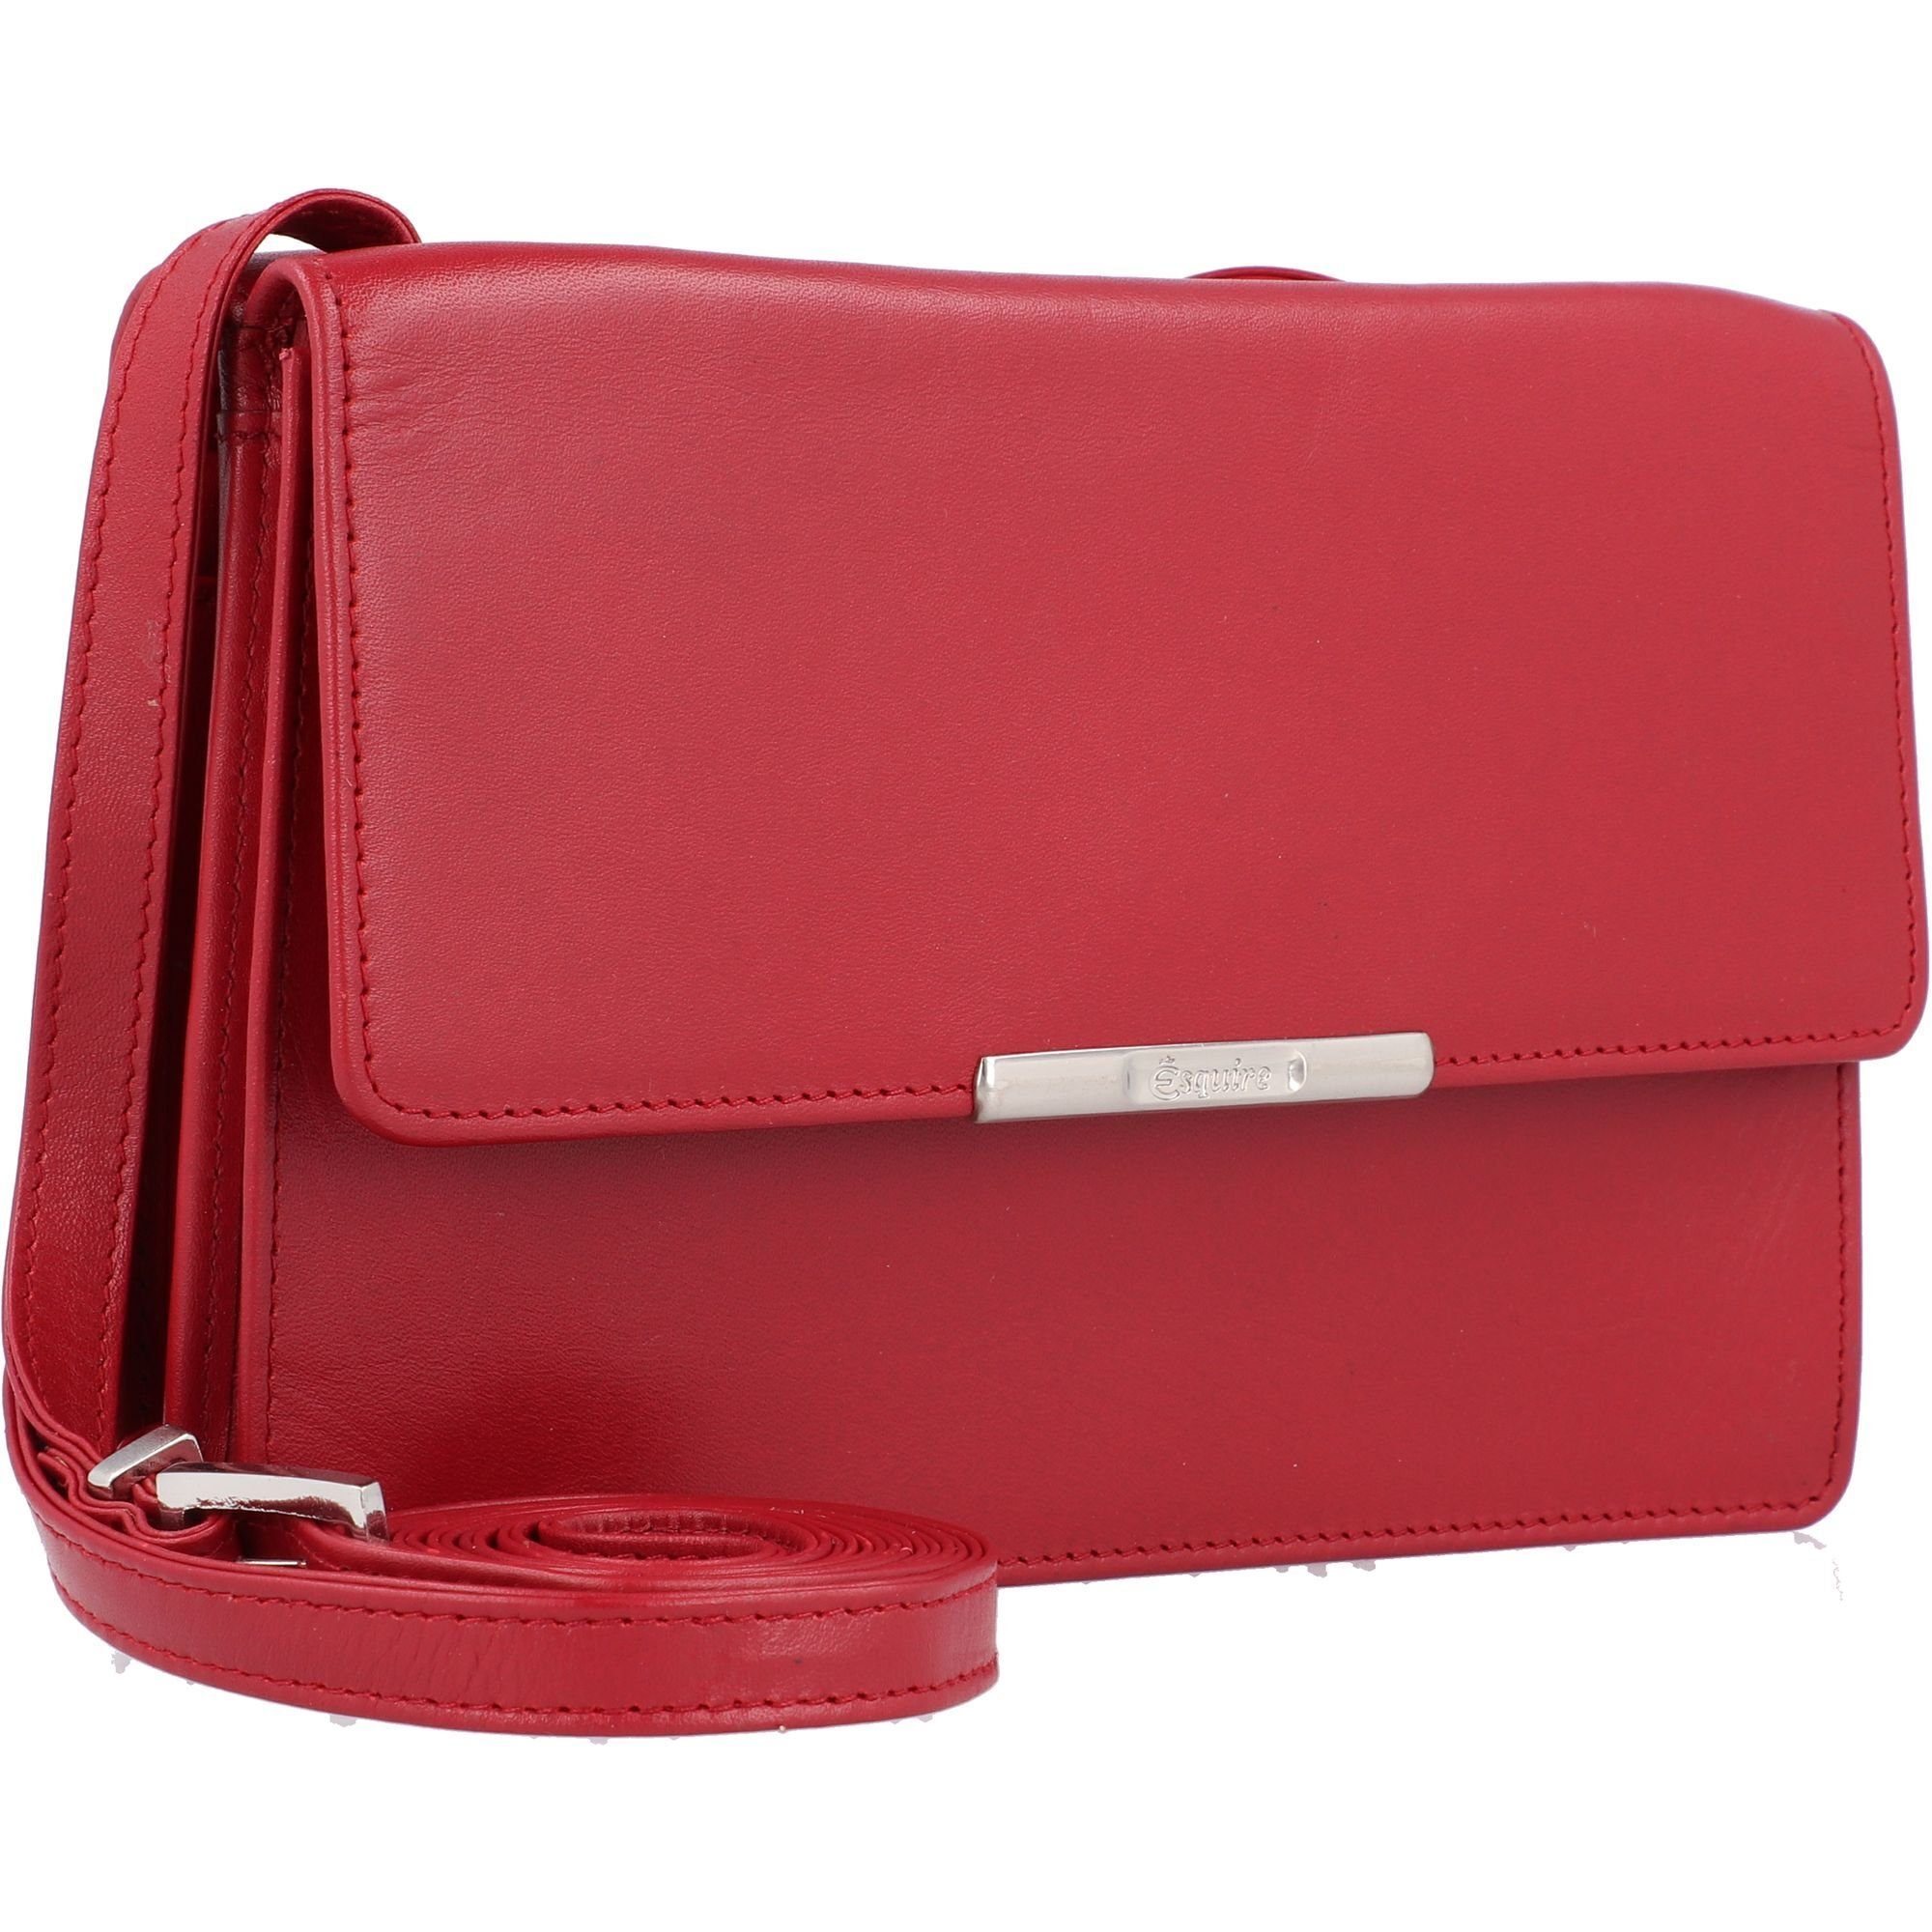 Esquire Clutch Helena, Leder rot